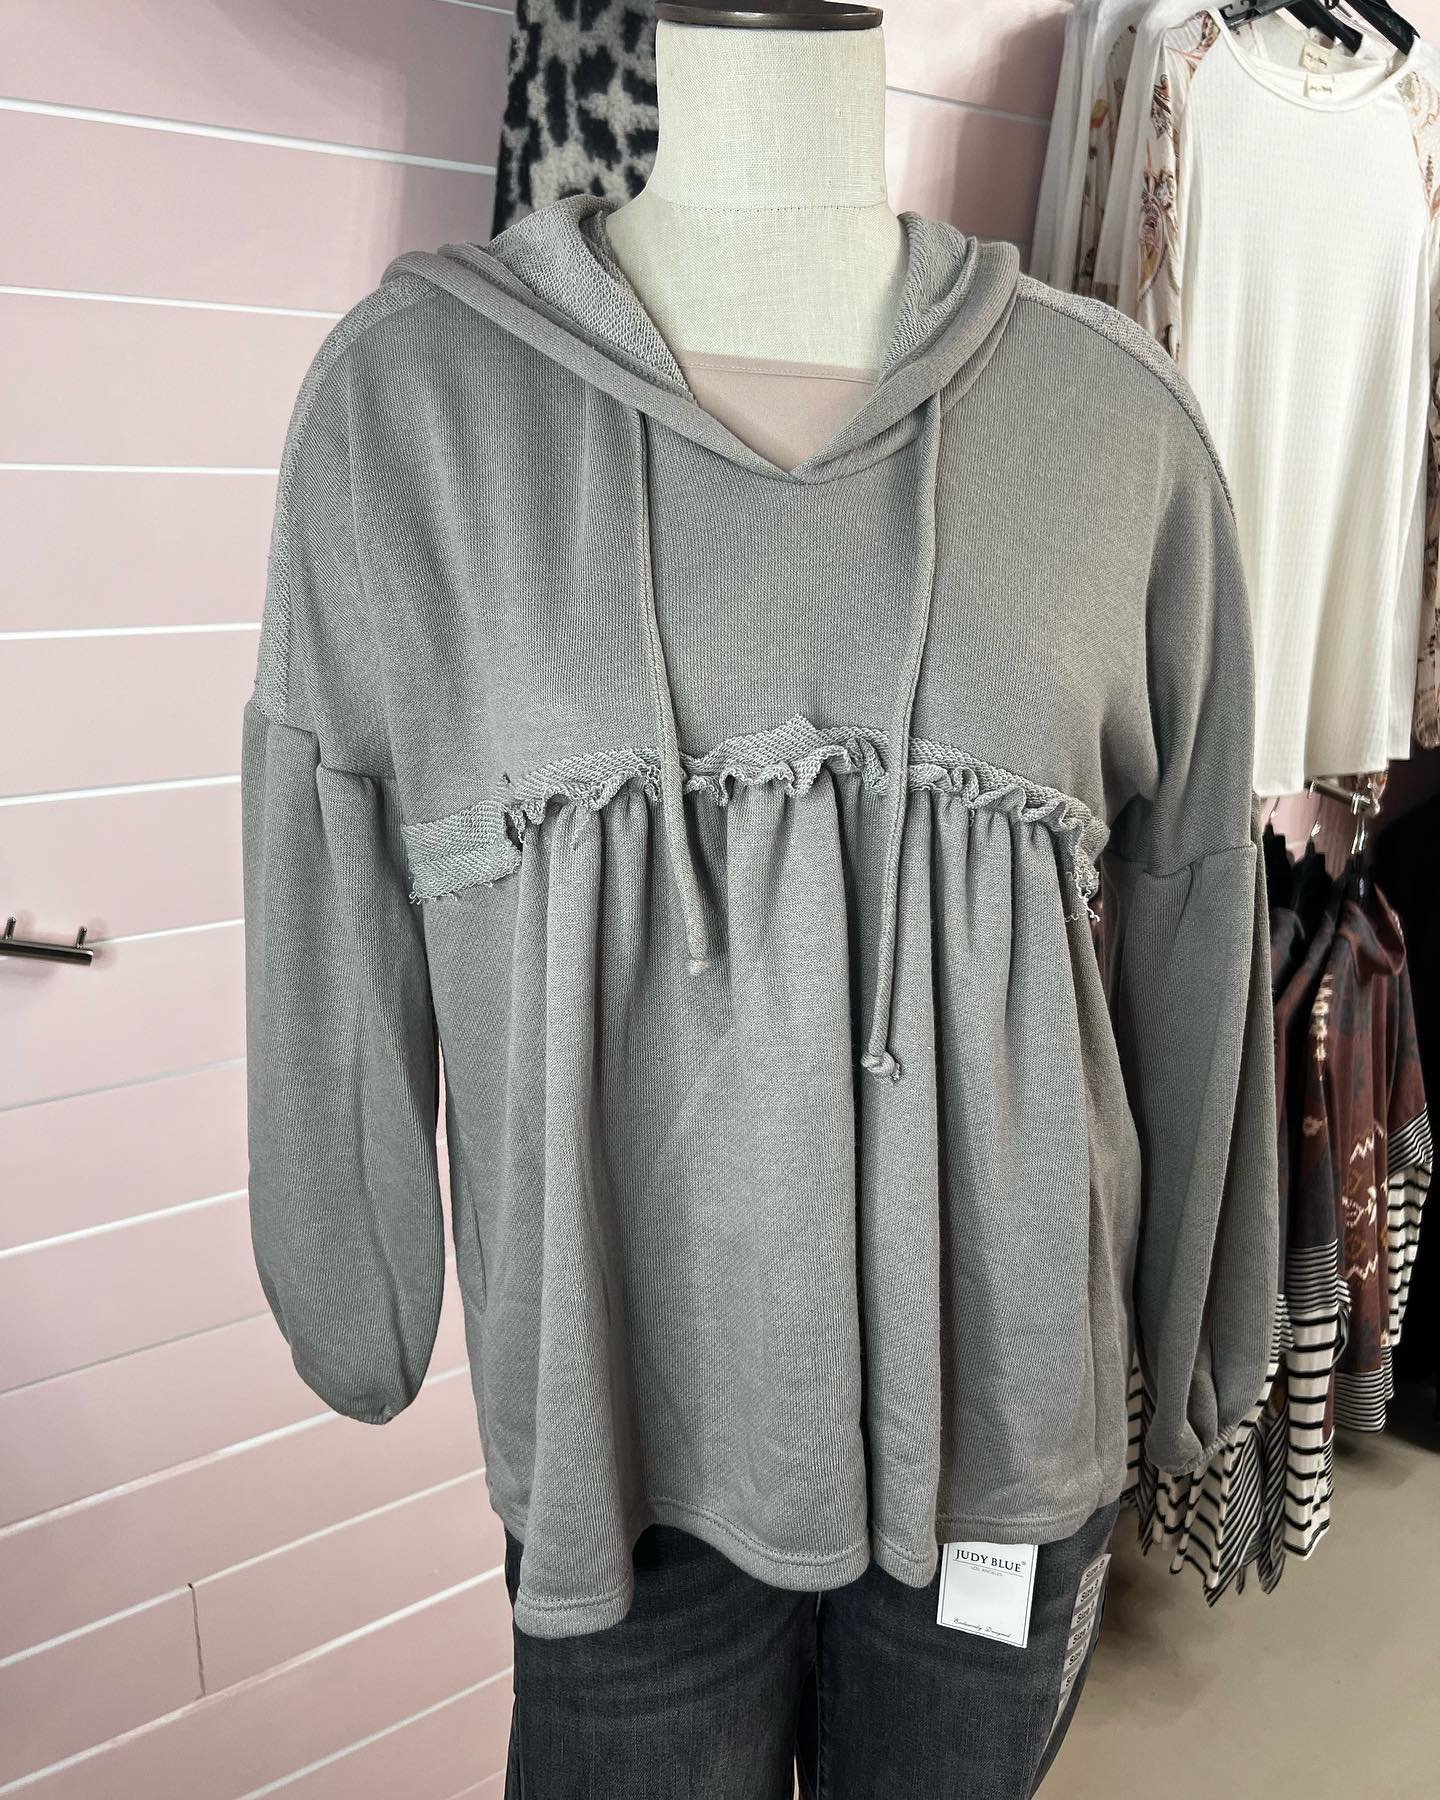 Teddy Thermal Pullover Sweatshirt Top Off White - Southern Fashion Boutique  Bliss